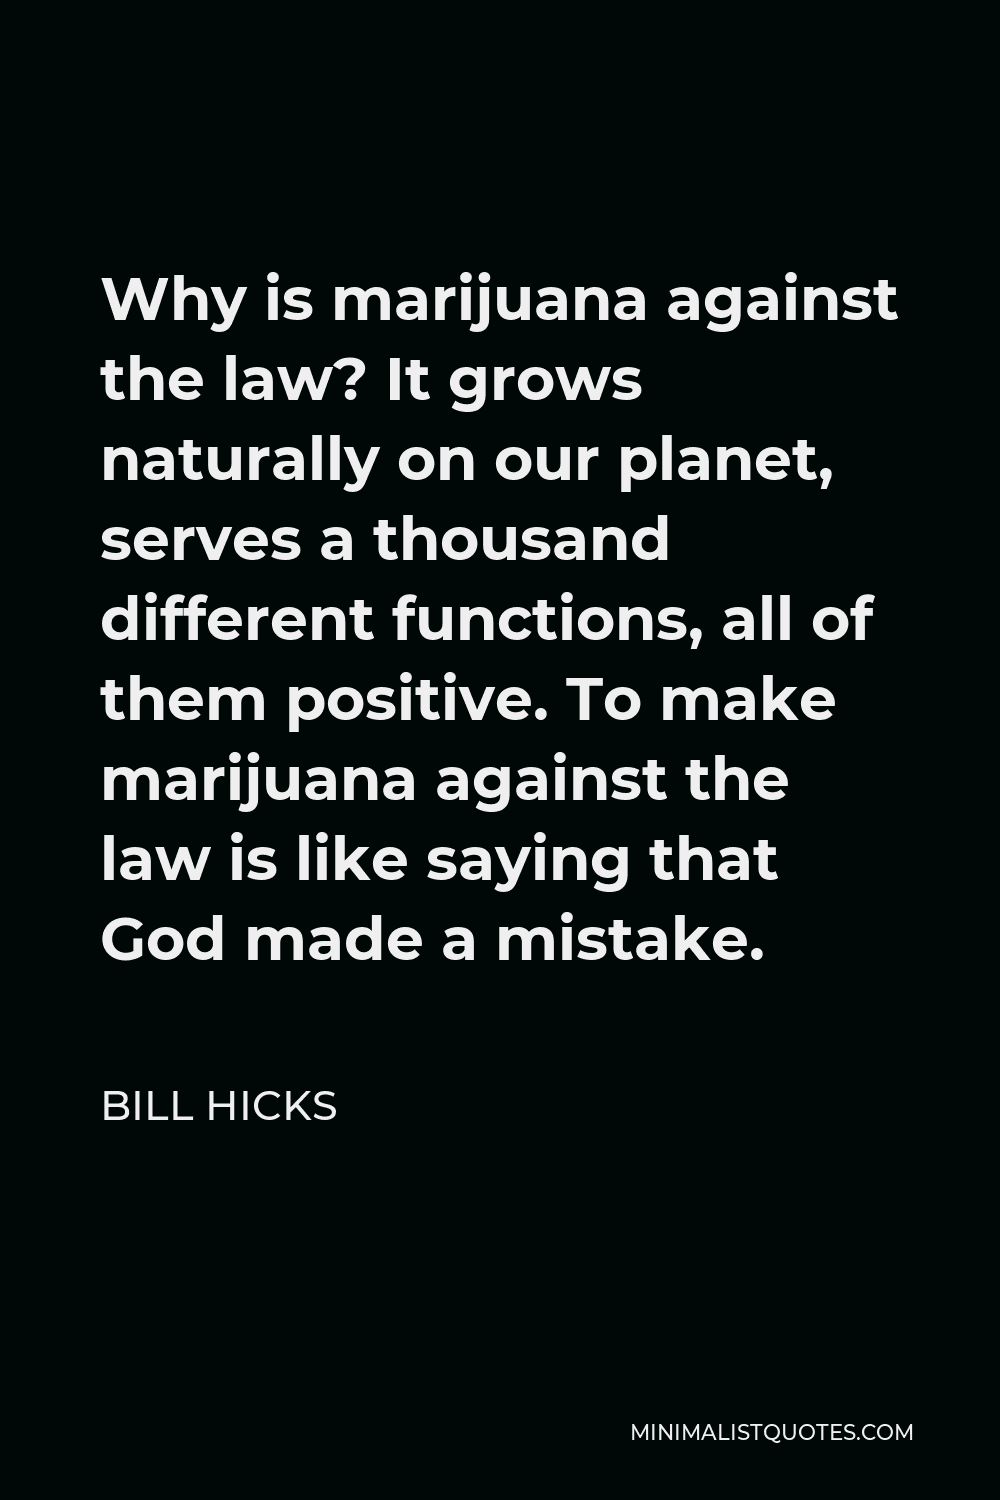 Bill Hicks Quote - Why is marijuana against the law? It grows naturally on our planet, serves a thousand different functions, all of them positive. To make marijuana against the law is like saying that God made a mistake.